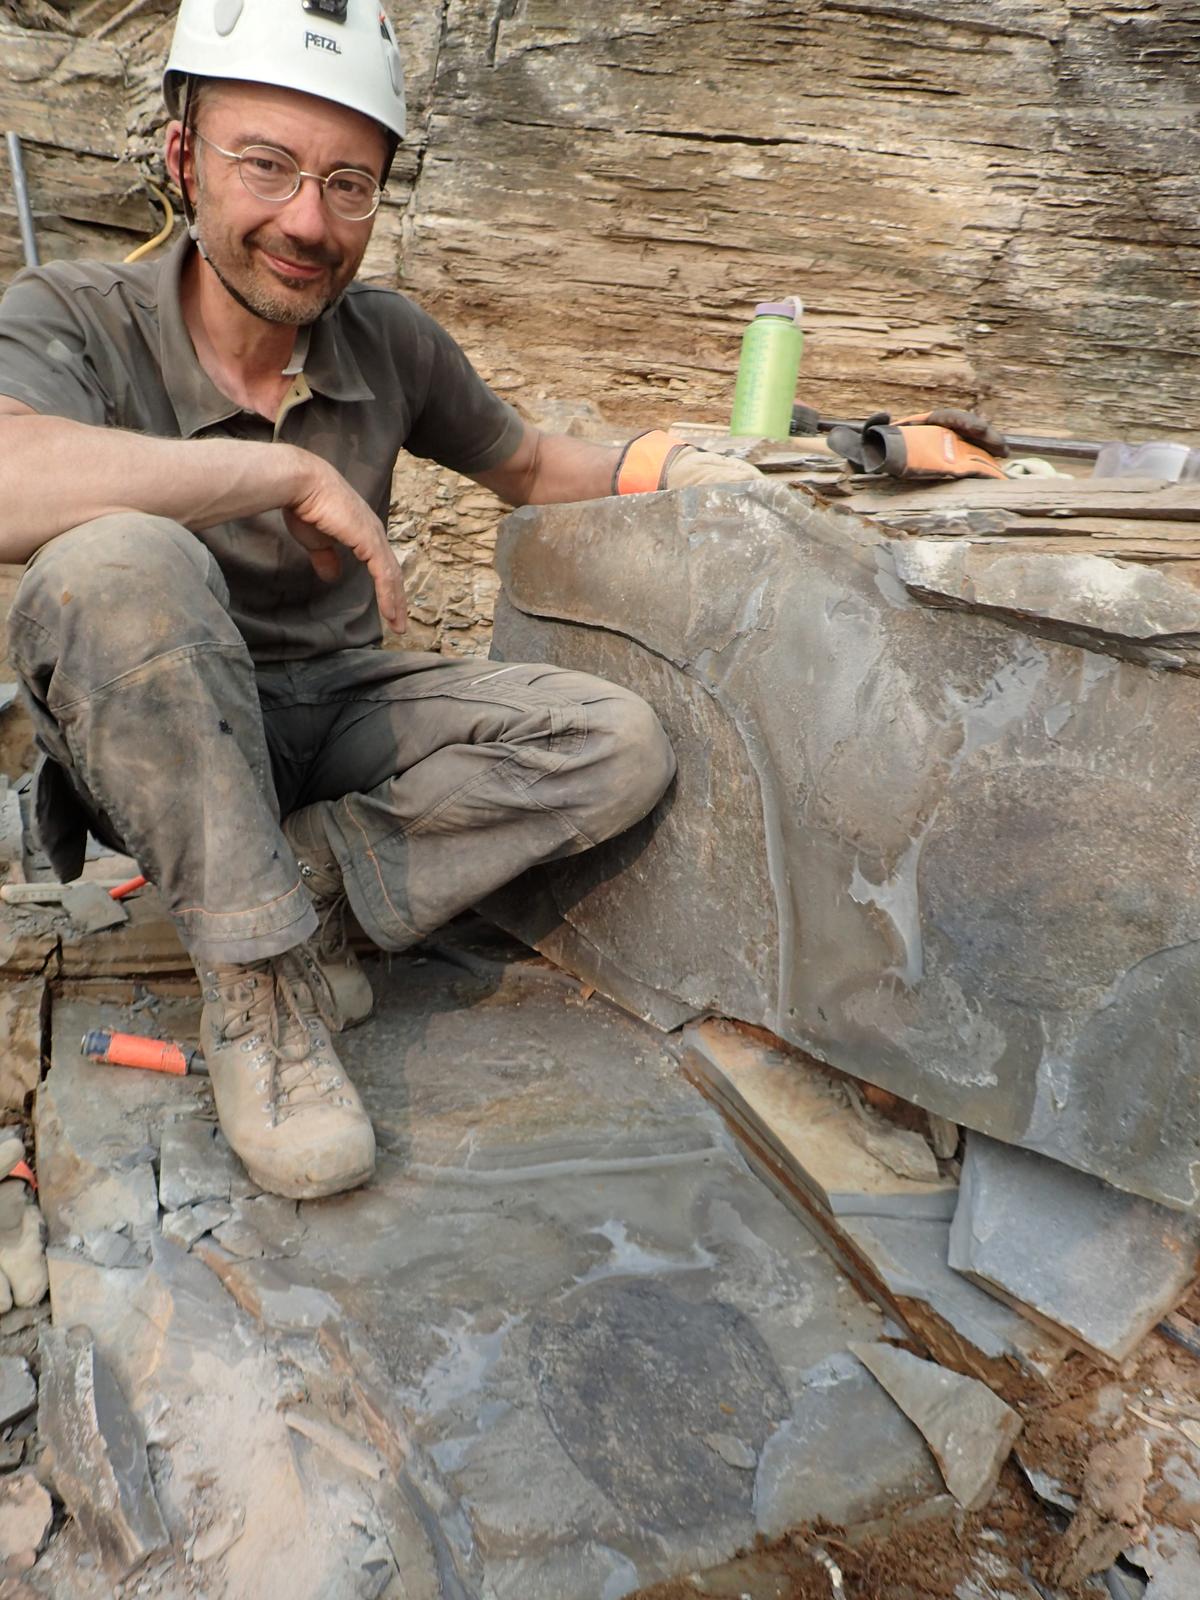  Dr. Jean-Bernard Caron, curator of invertebrate paleontology at the Royal Ontario Museum with a fossil of Titanokorys gainesi at the quarry site located in Kootenay National Park. (SWNS)